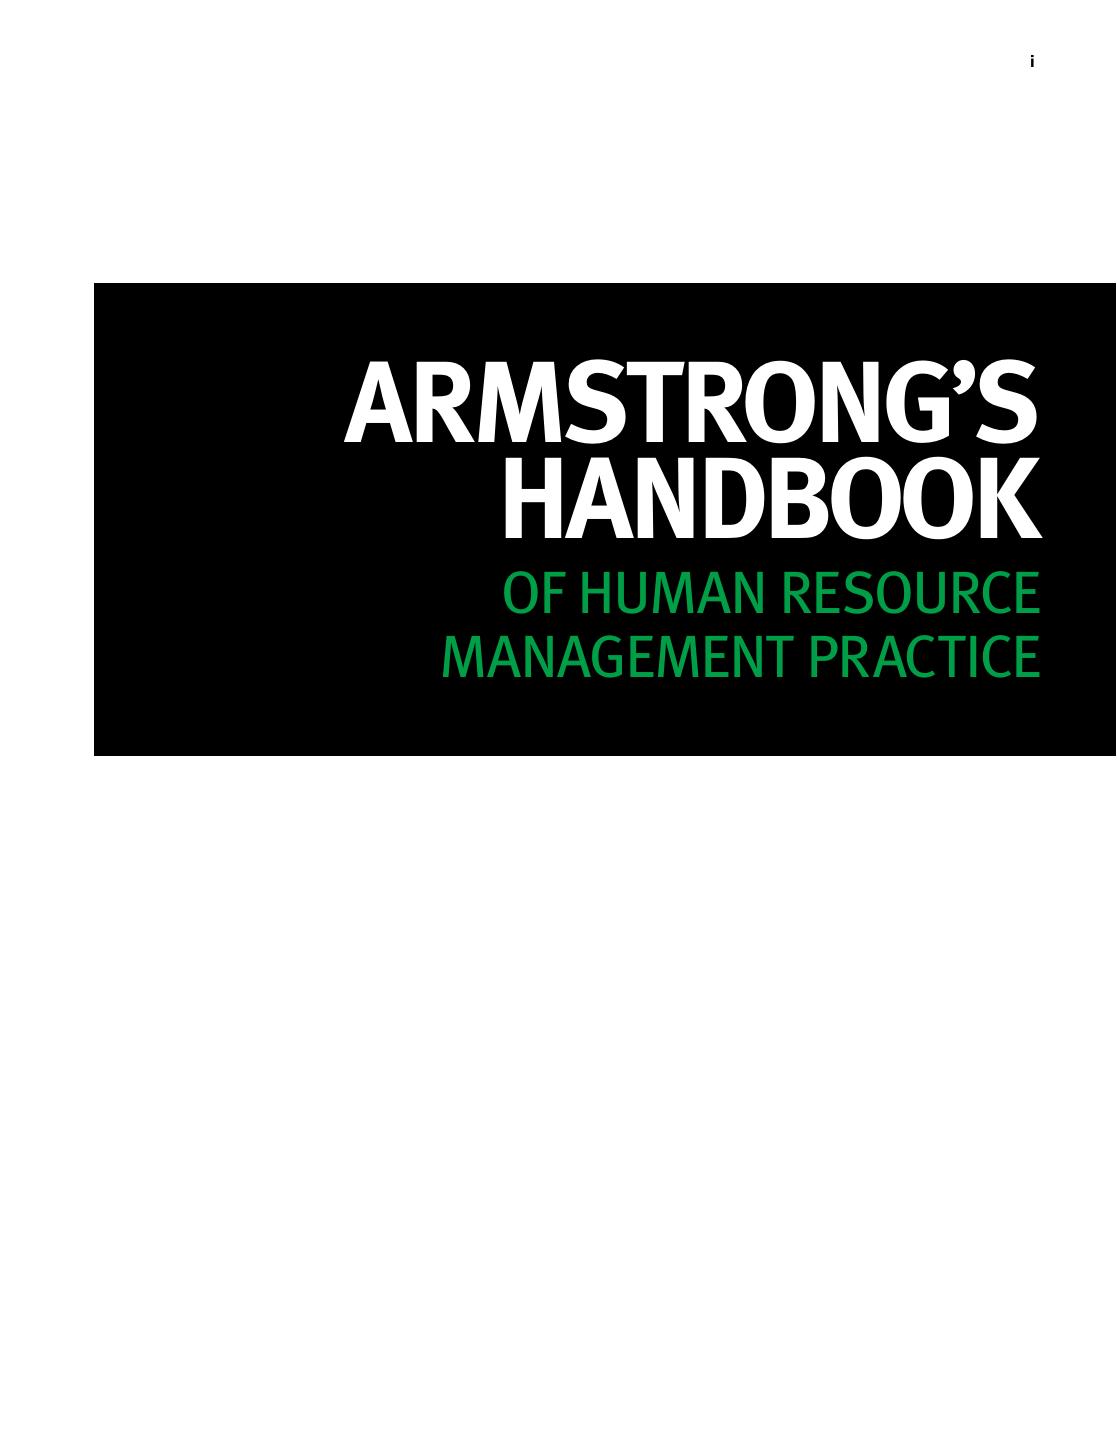 Michael Armstrong Armstrongs handbook of human resource management practice 2012